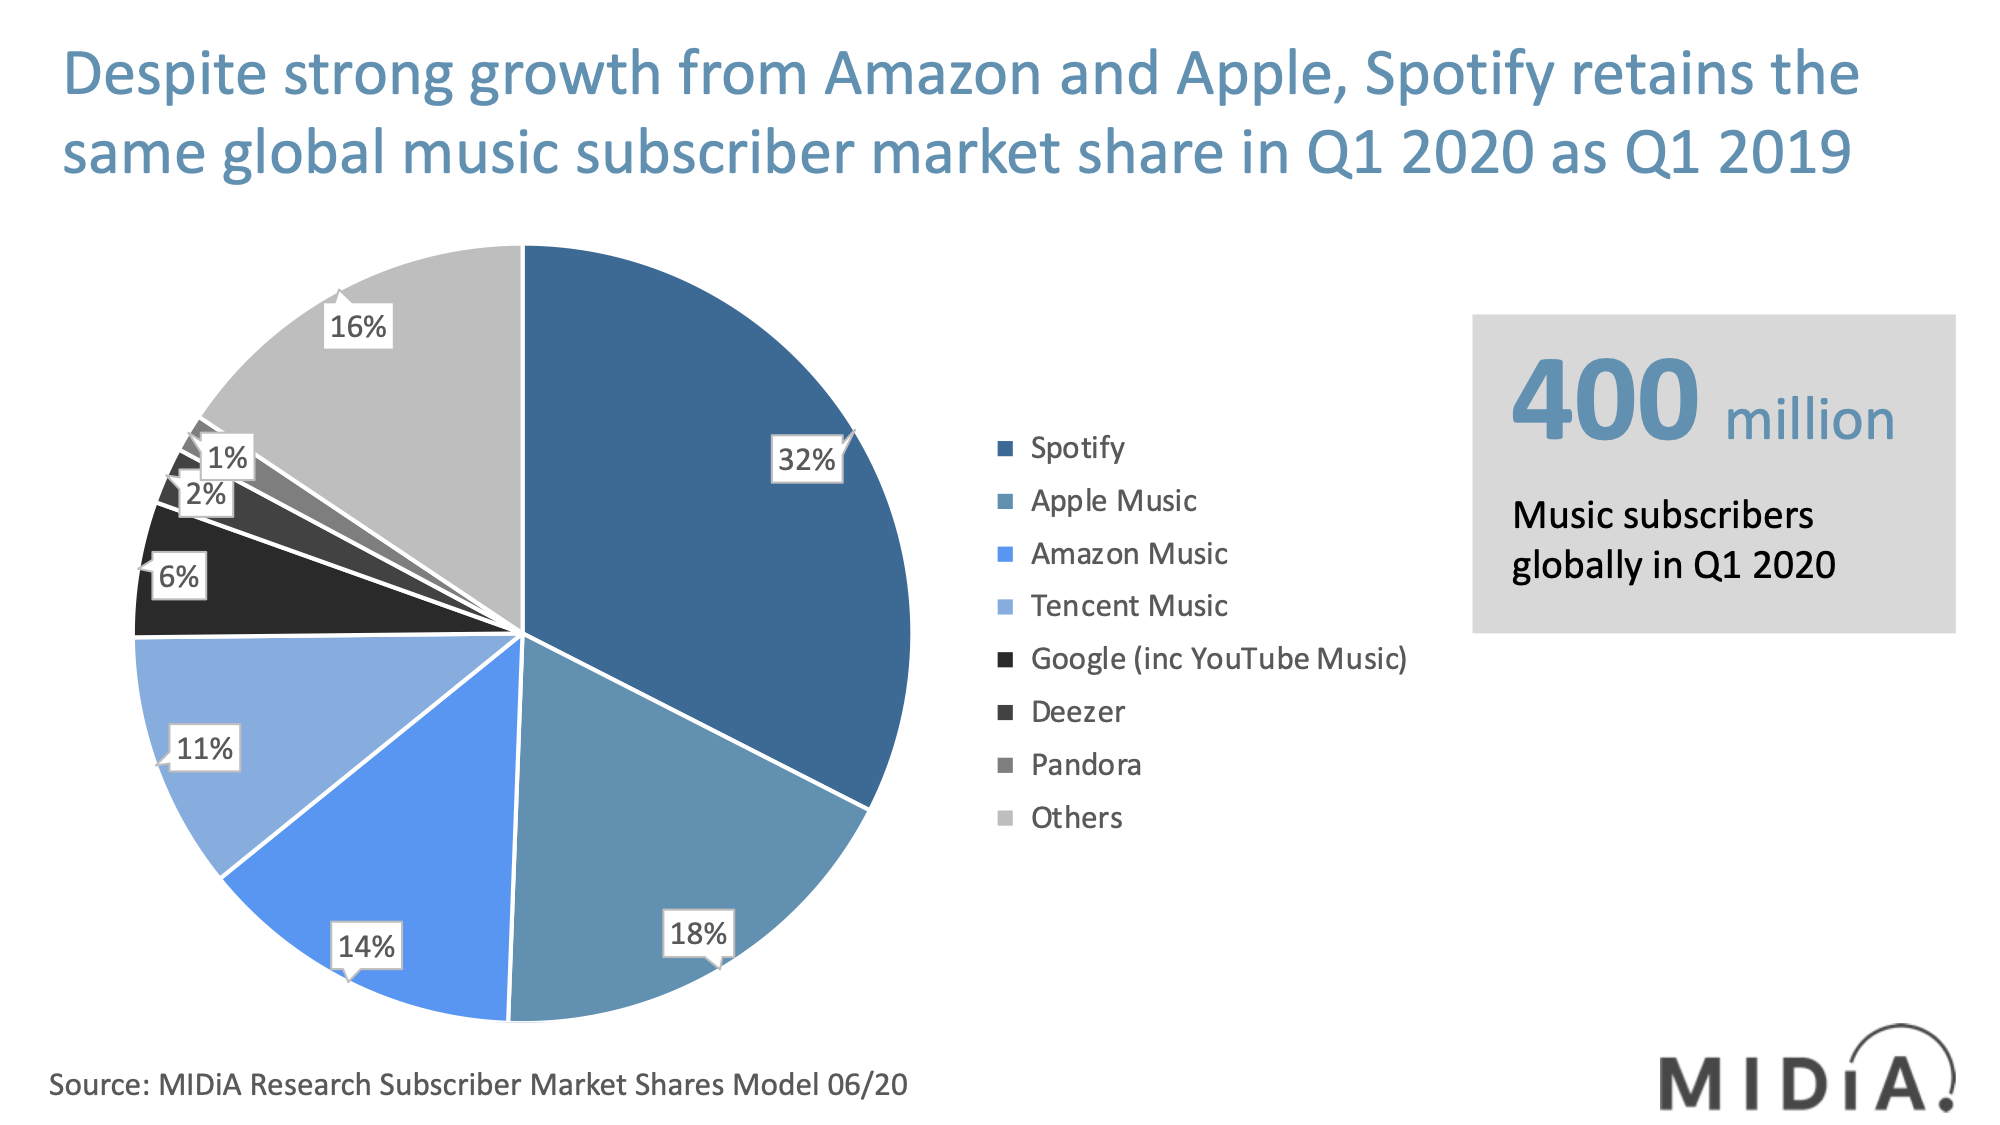 2020 saw 100 million new music streaming subscribers